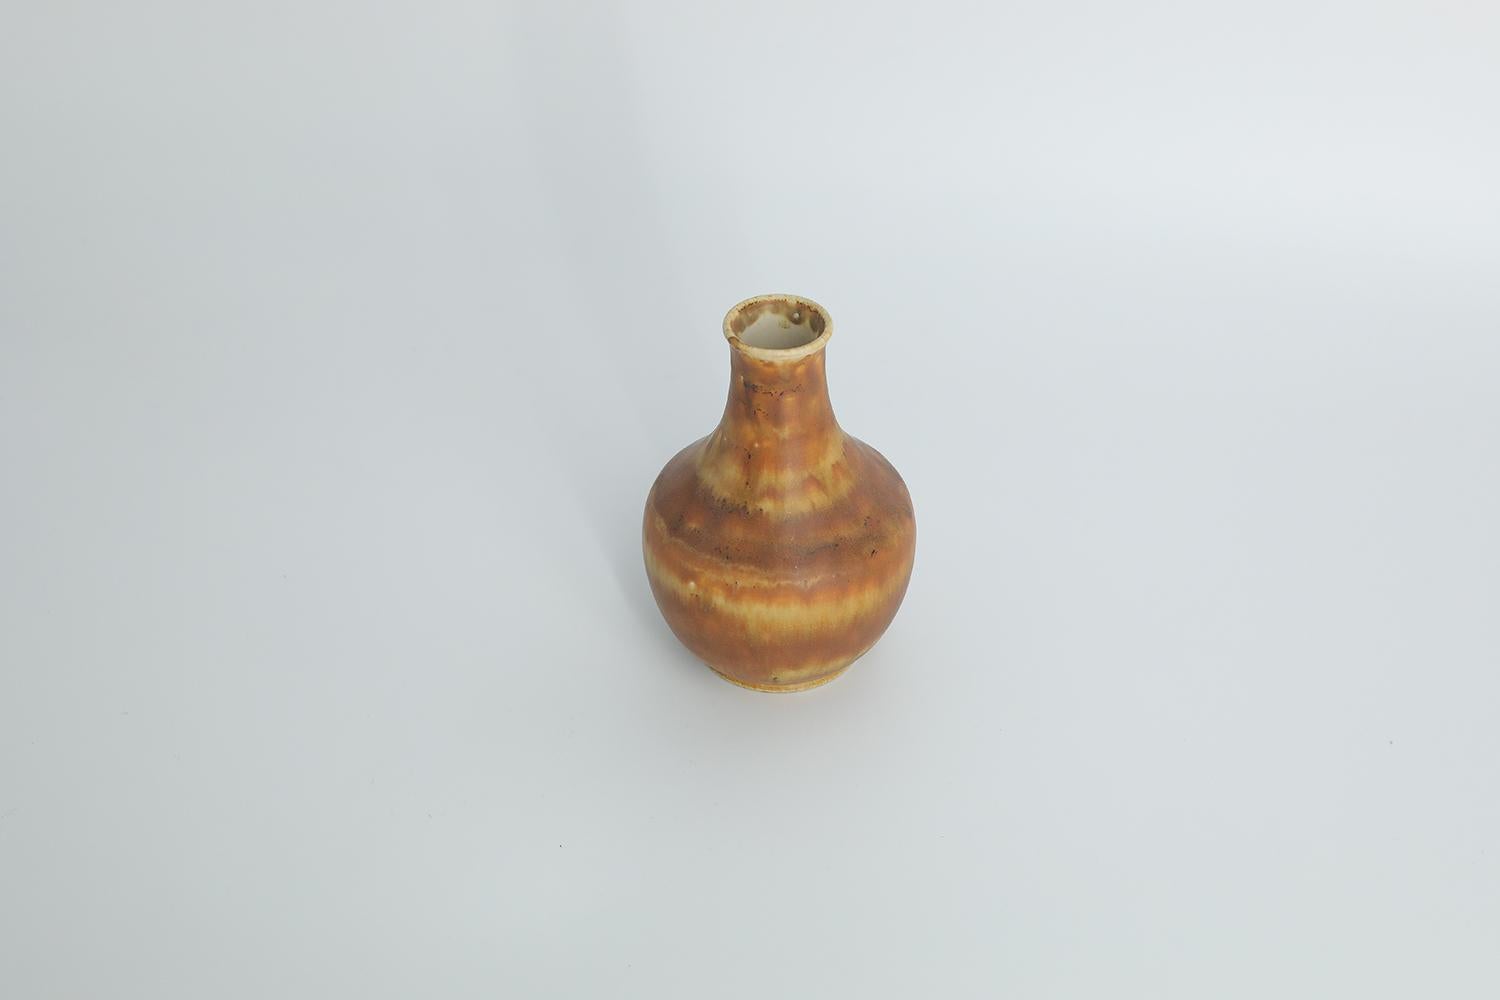 This miniature, collectible stoneware vase was designed by Gunnar Borg for the Swedish manufacture Höganäs Keramik during the 1960s. Handmade by a Master, with the utmost care and attention to details. The vase is colored in an irregular shade of